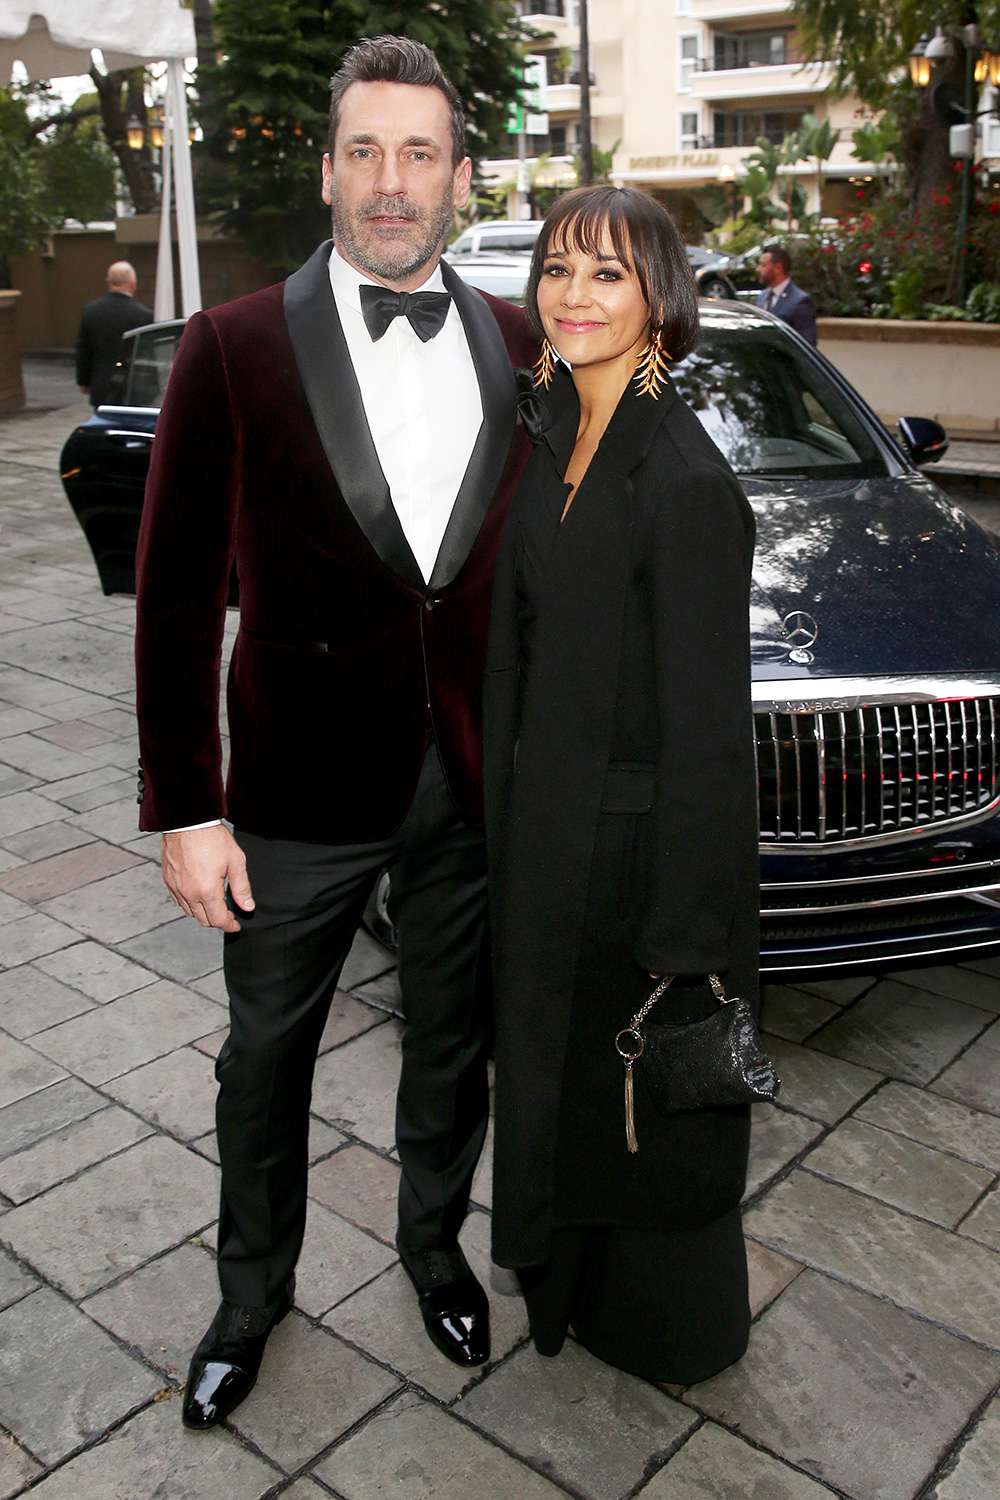 Jon Hamm and Rashida Jones attend the Mercedes-Benz Academy Awards Viewing Party at The Four Seasons Hotel Los Angeles at Beverly Hills on February 09, 2020 in Los Angeles, California